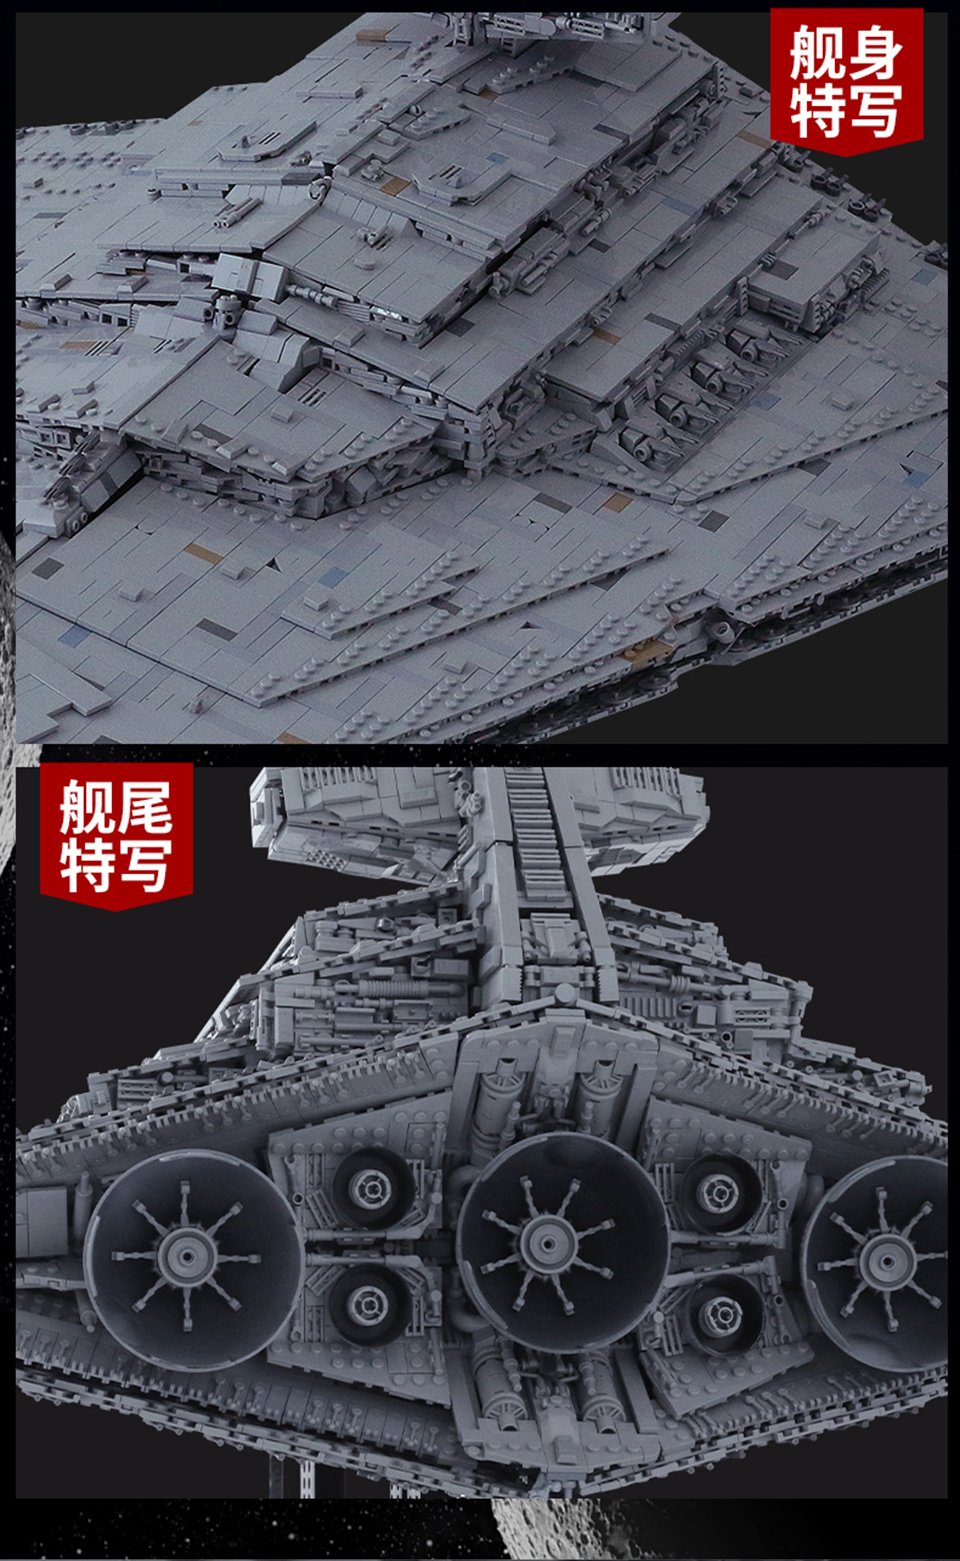  Mould King 13135 Super Star Destroyer Model, Imperial-Class I Star  Destroyer Building Toy, 11885+Pcs Collectible Buildable Model, Build and  Play Awesome Toy Building Kit for Boys 8-12 : Toys & Games